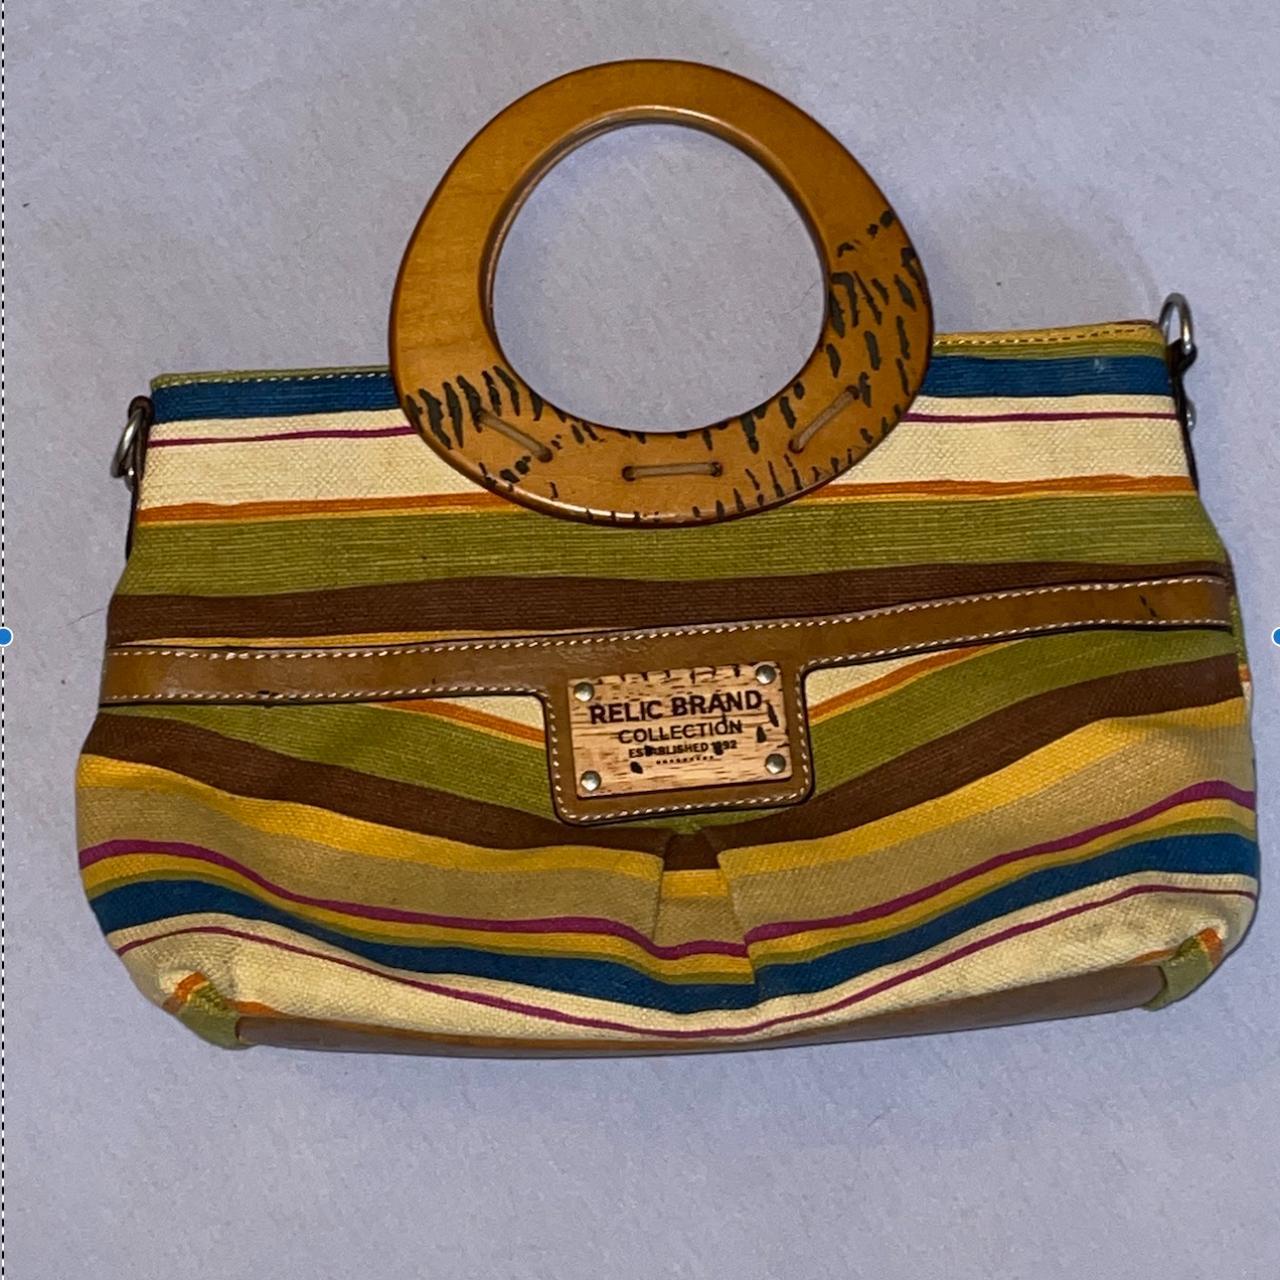 Relic Brand Collection Purse with Wood Handles